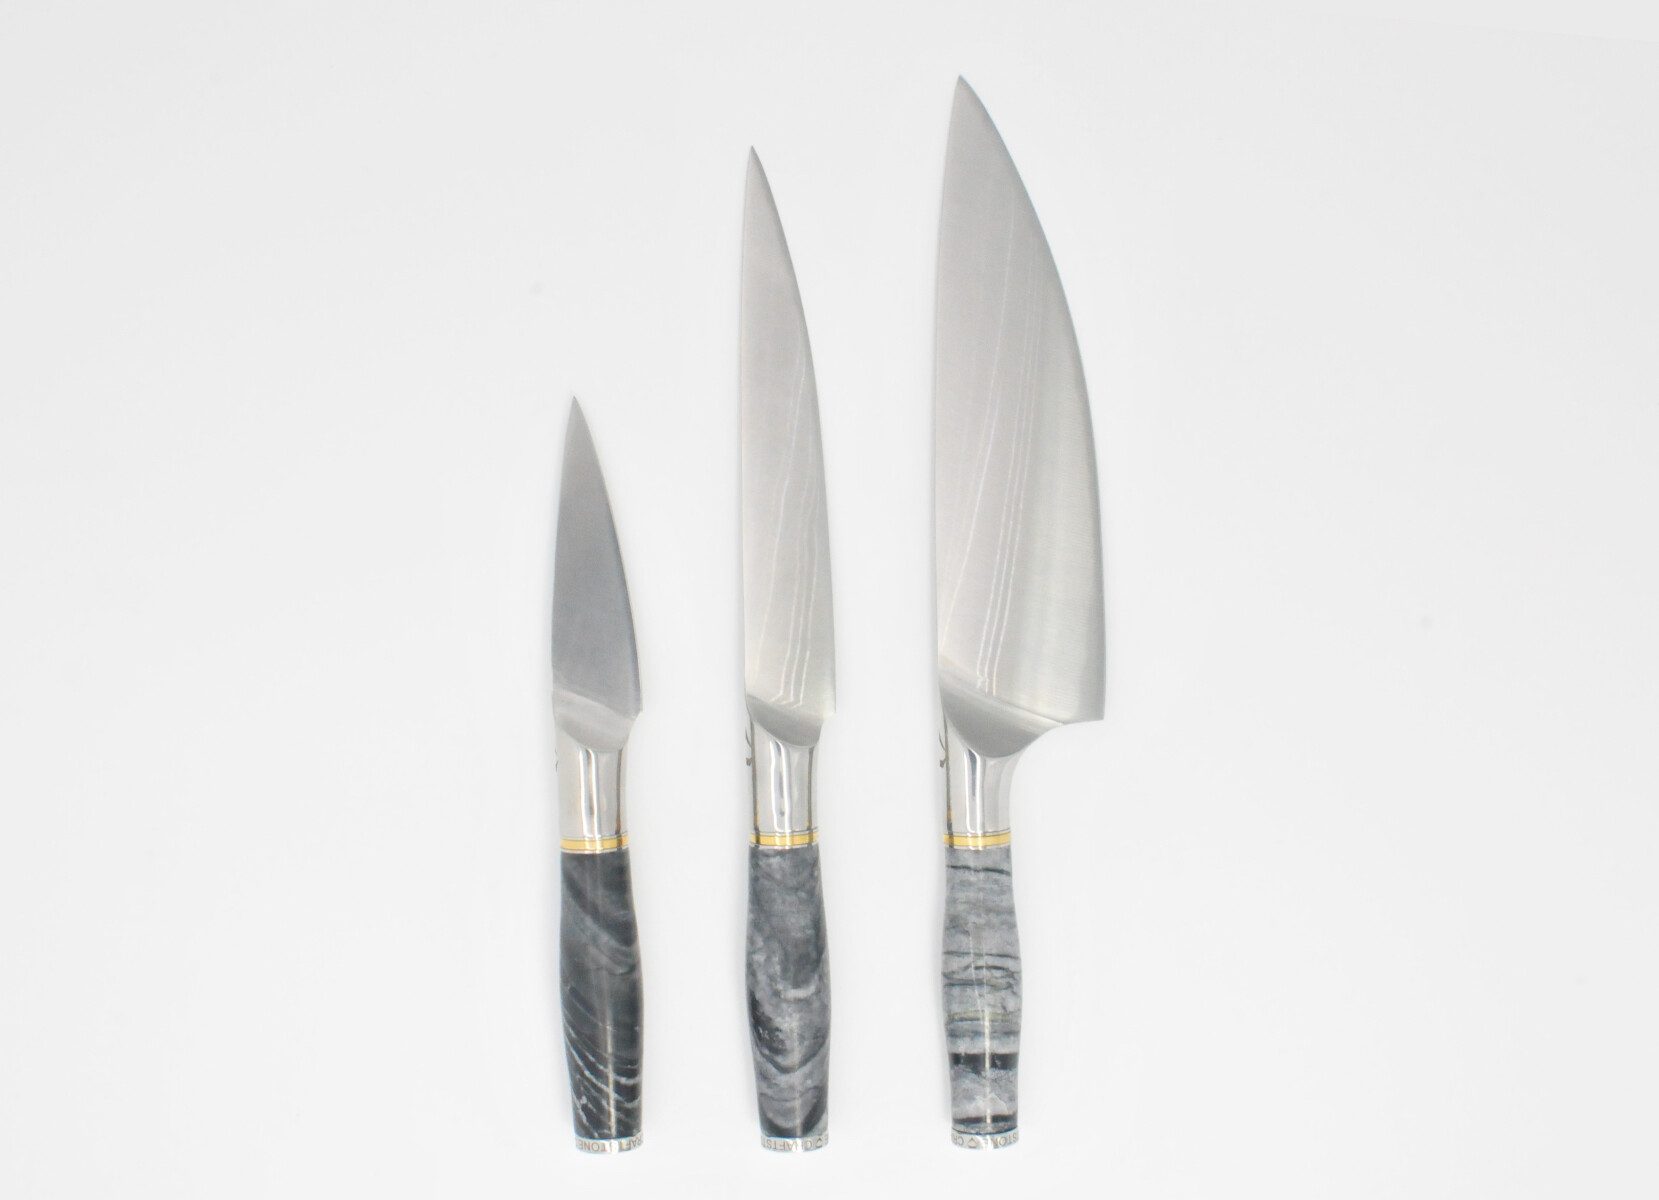 https://www.craftstoneknives.com/wp-content/uploads/bfi_thumb/3-Knife-set-with-a-Ancient-Wood-Vein-Marble-Handle-a-Champagne-Cubic-Zirconia-Stone-at-the-Back-of-the-Knife-and-Brass-and-Stainless-Steel-Decorative-Rings-3jbc8qnnkp92bw0q09y6tm.jpg